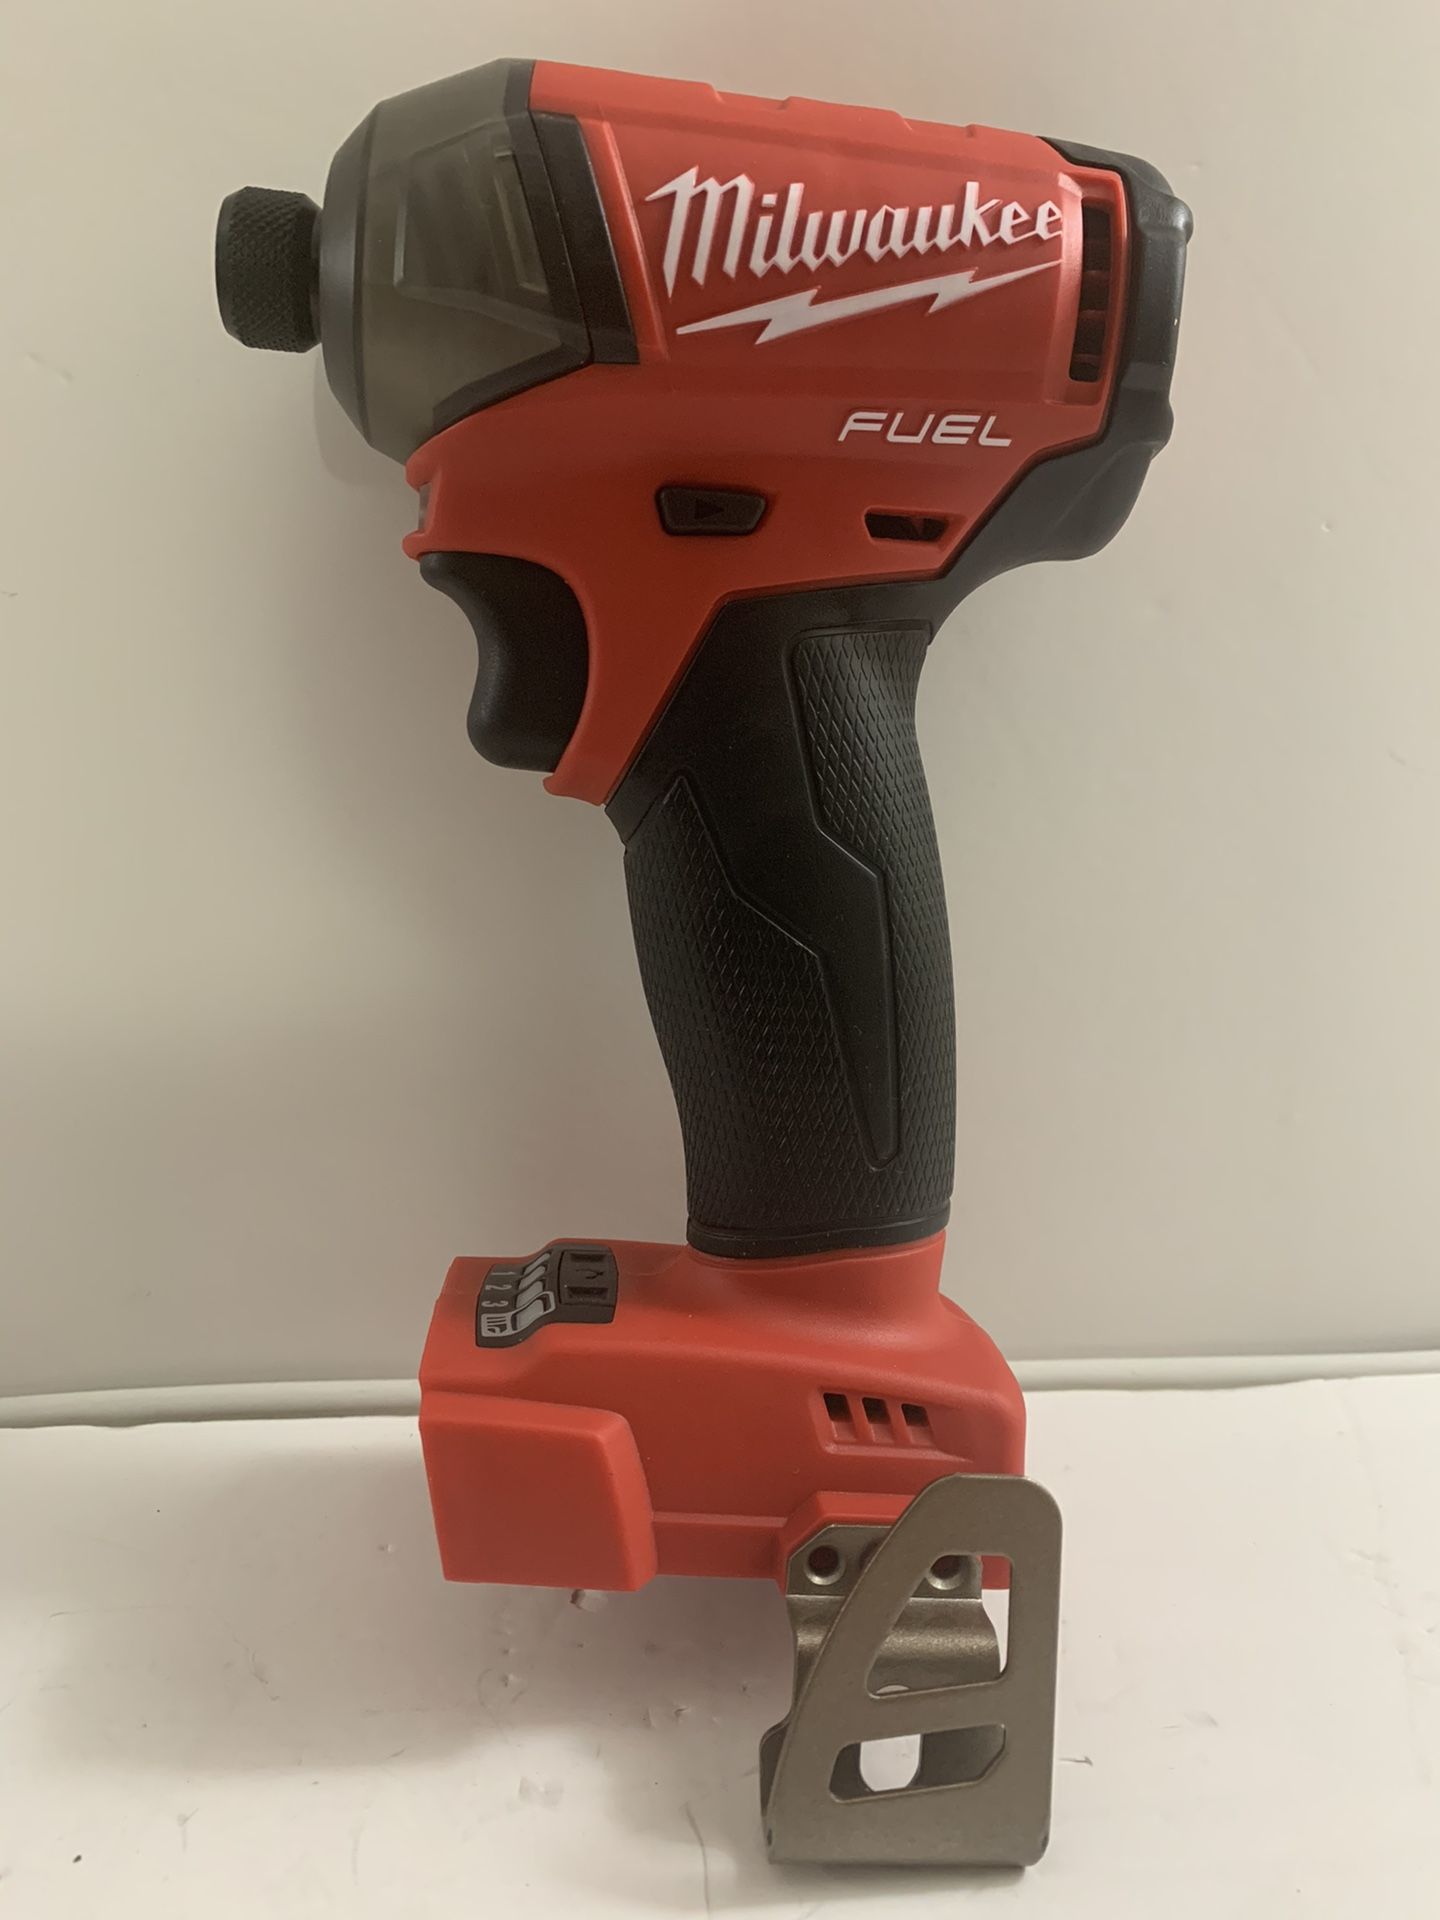 Milwaukee impact drill SURGE hex hydraulic driver FUEL brushless 4 speed (ONLY TOOL BRAND NEW)SOLO LA HERRAMIENTA